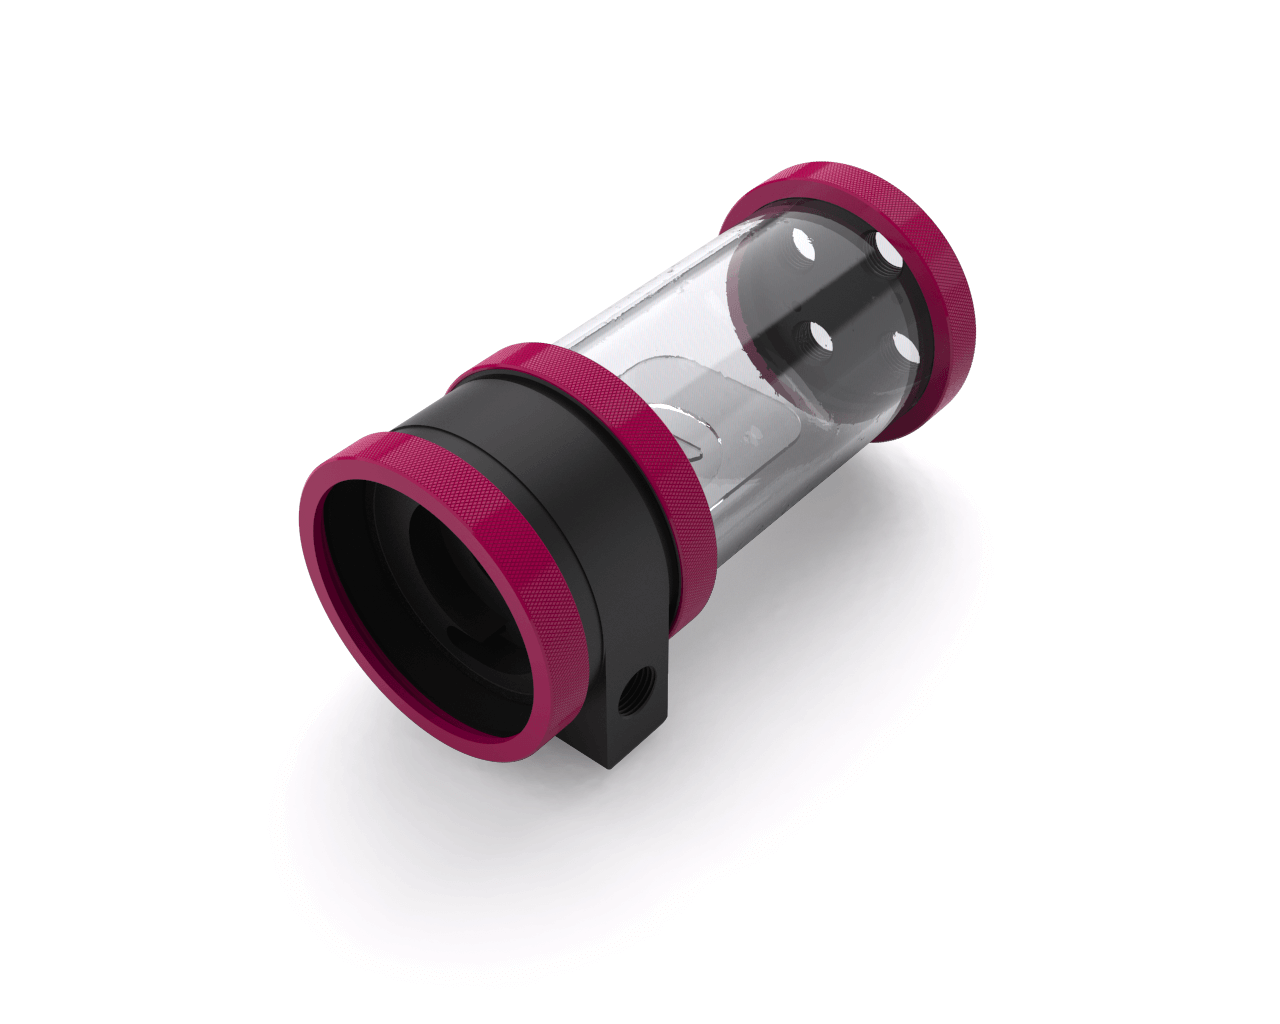 PrimoChill CTR SFF Phase II High Flow D5 Enabled Reservoir System - Black POM - 120mm - PrimoChill - KEEPING IT COOL Magenta